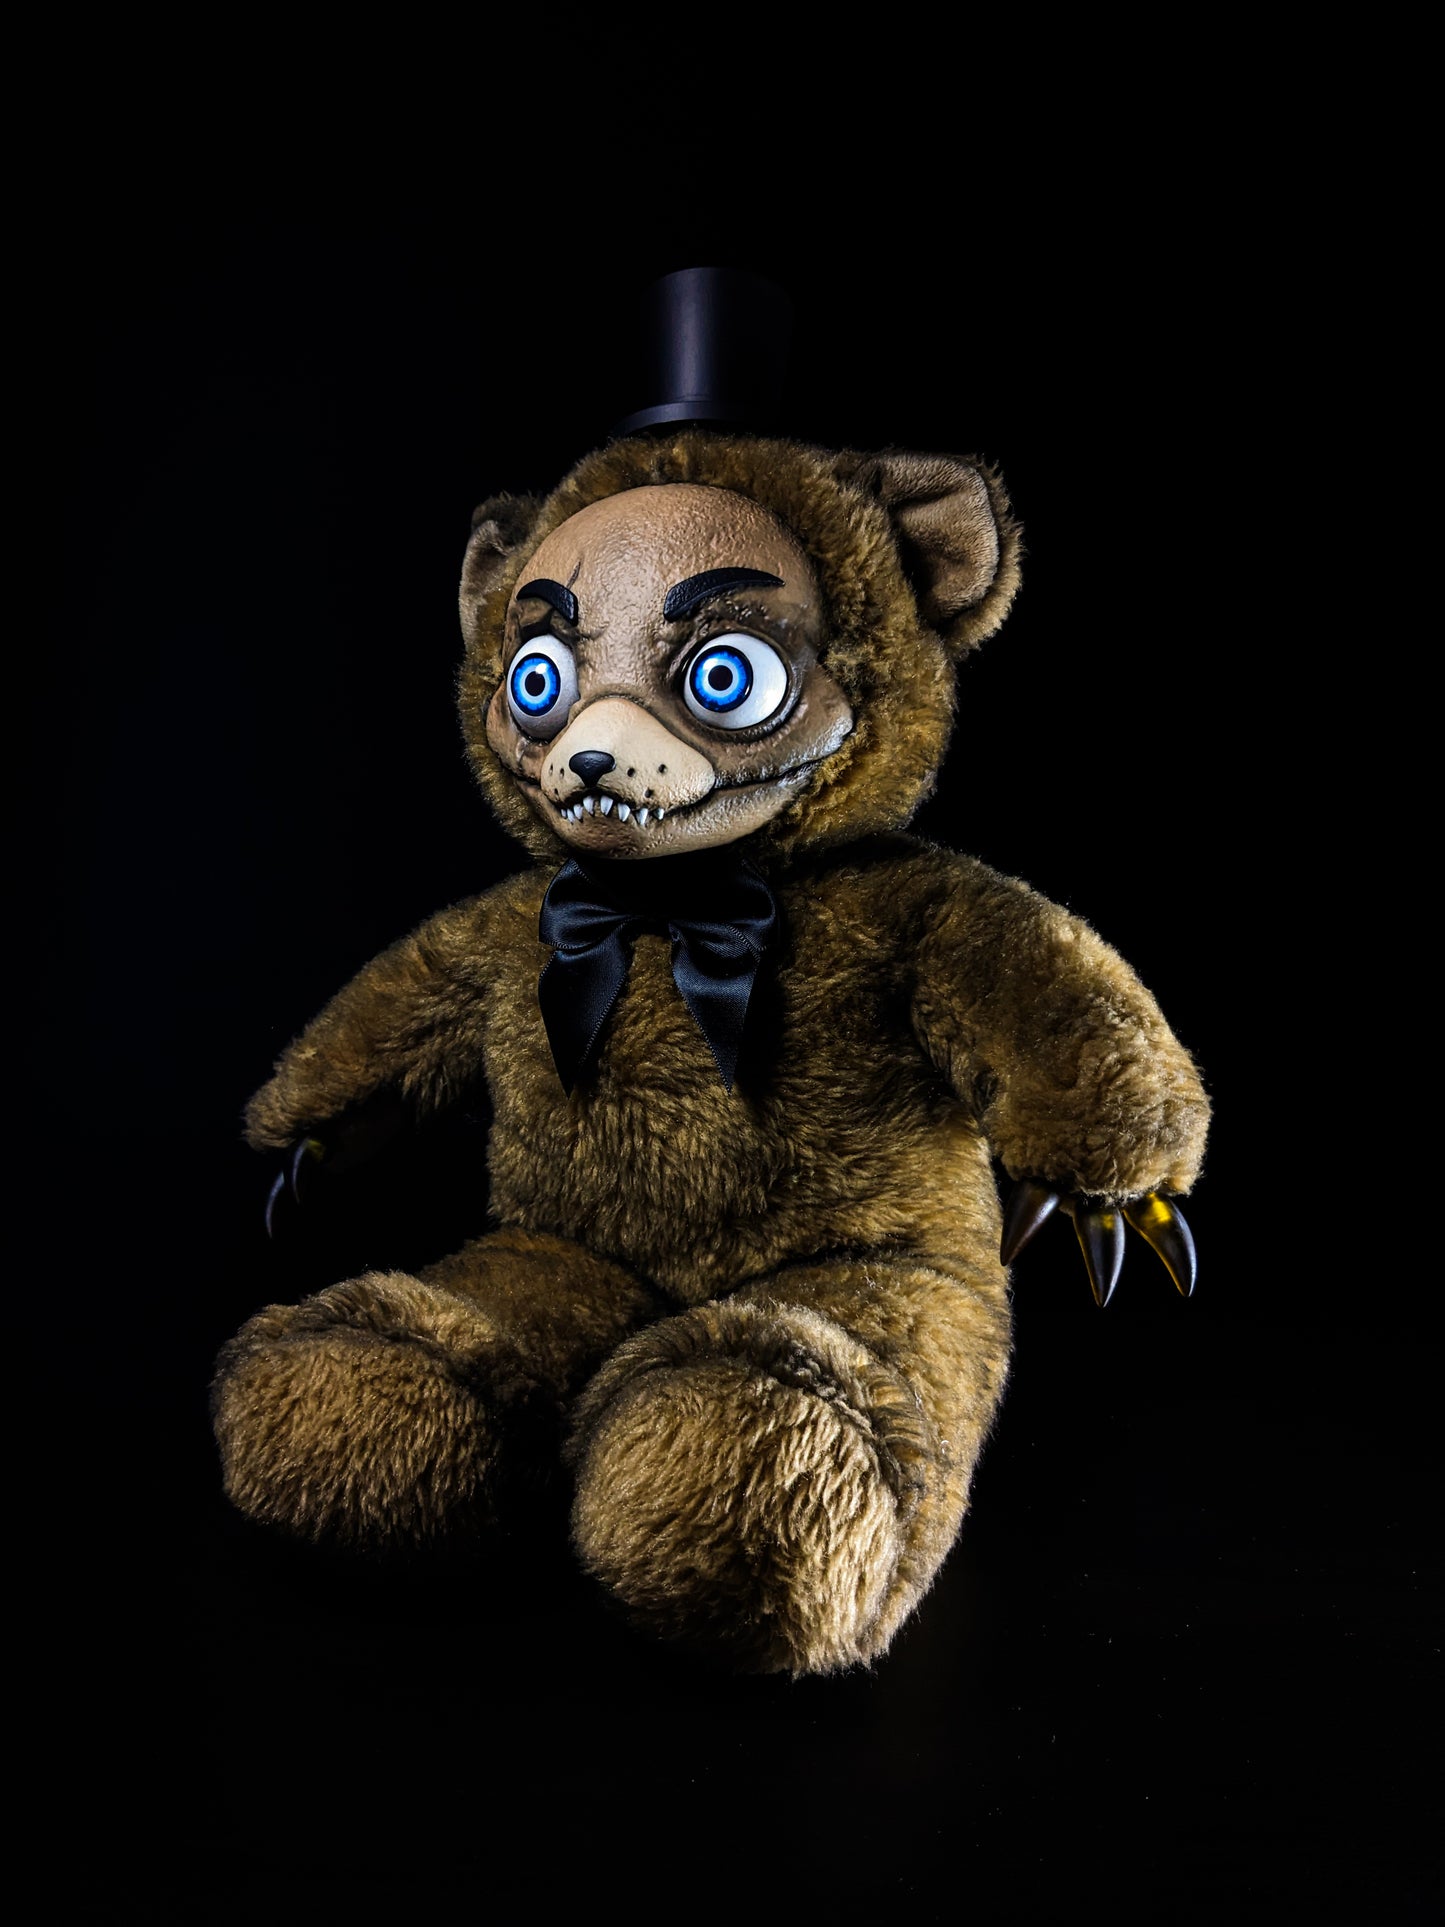 Withered Freddy: FREDBEARZ - Five Nights at Freddy's Inspired CRYPTCRITZ